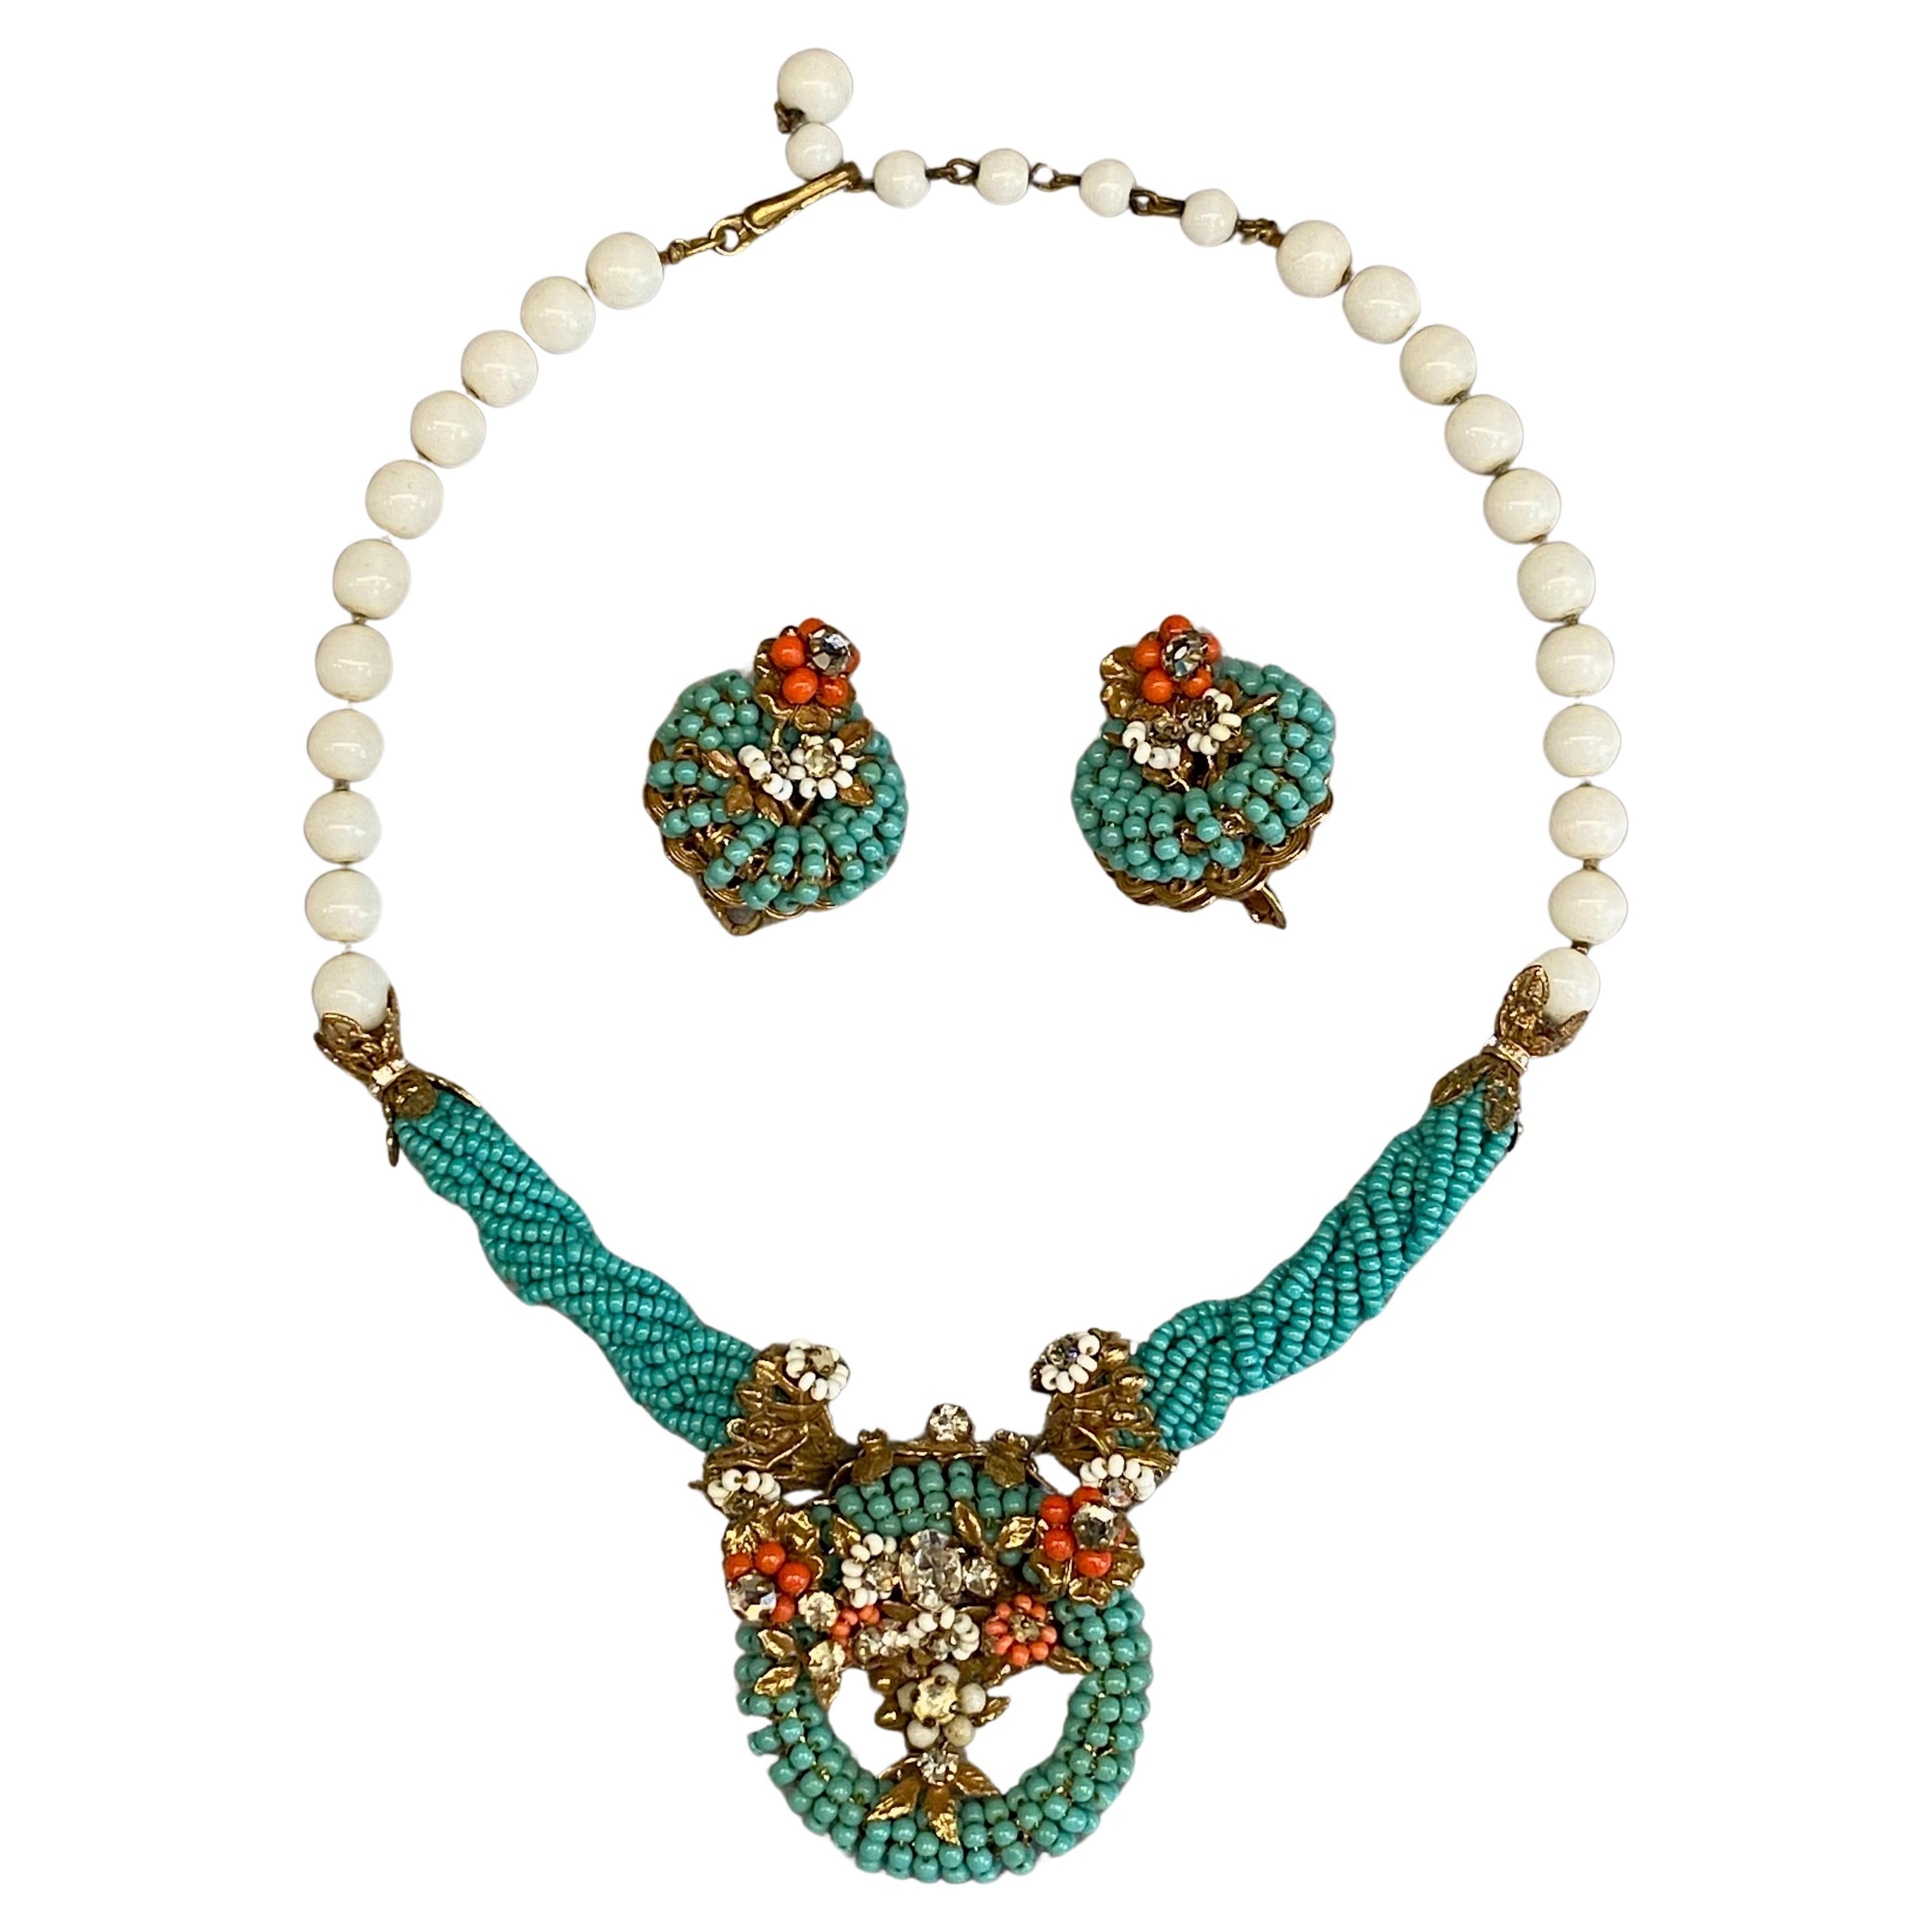 Original by Robert 1950s turquoise, coral & white glass beed necklace & earrings